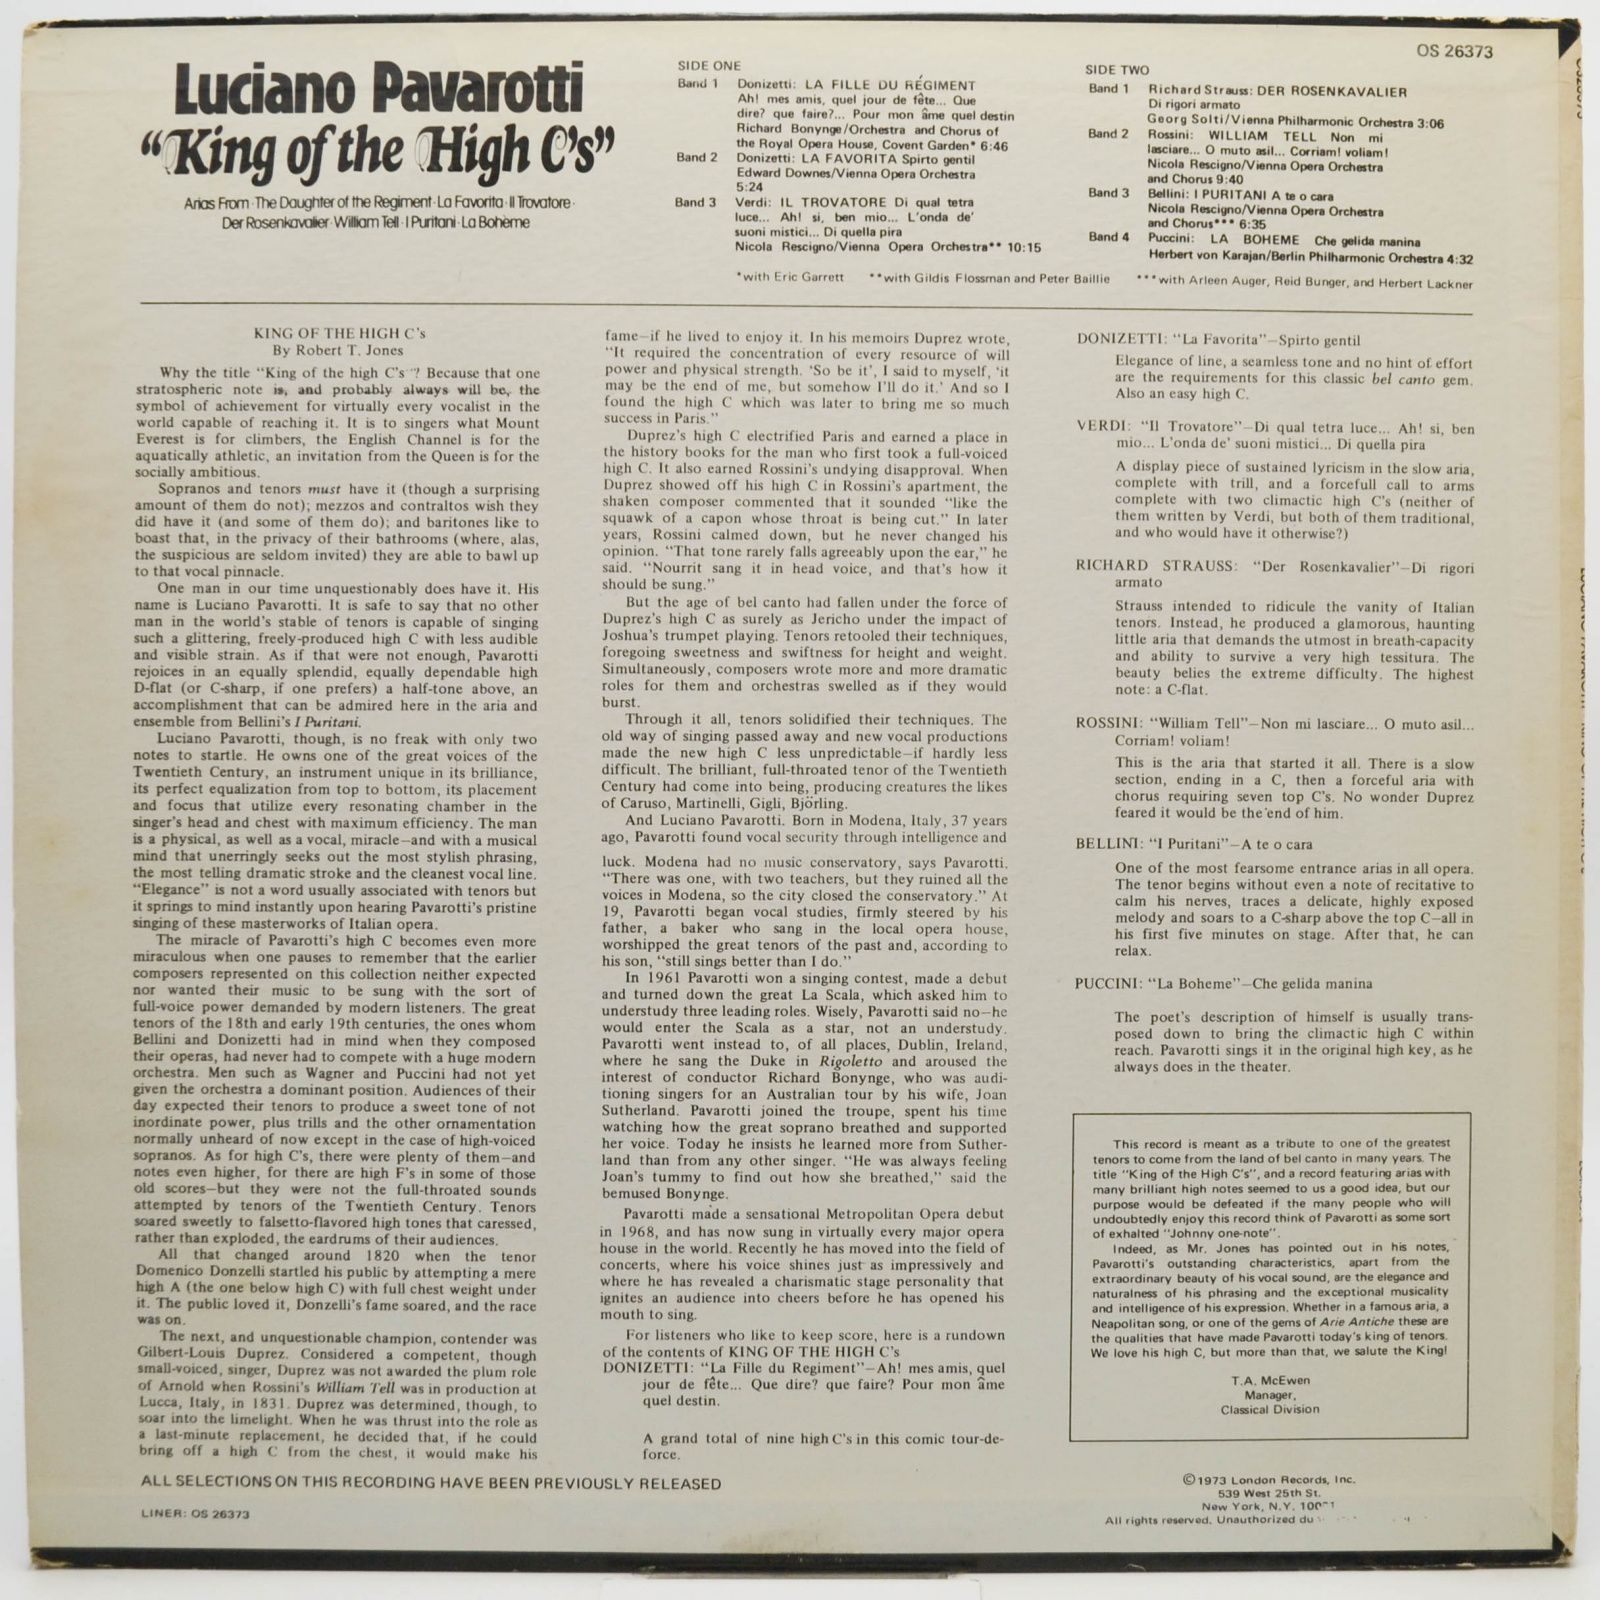 Luciano Pavarotti — King Of The High C's (UK), 1973